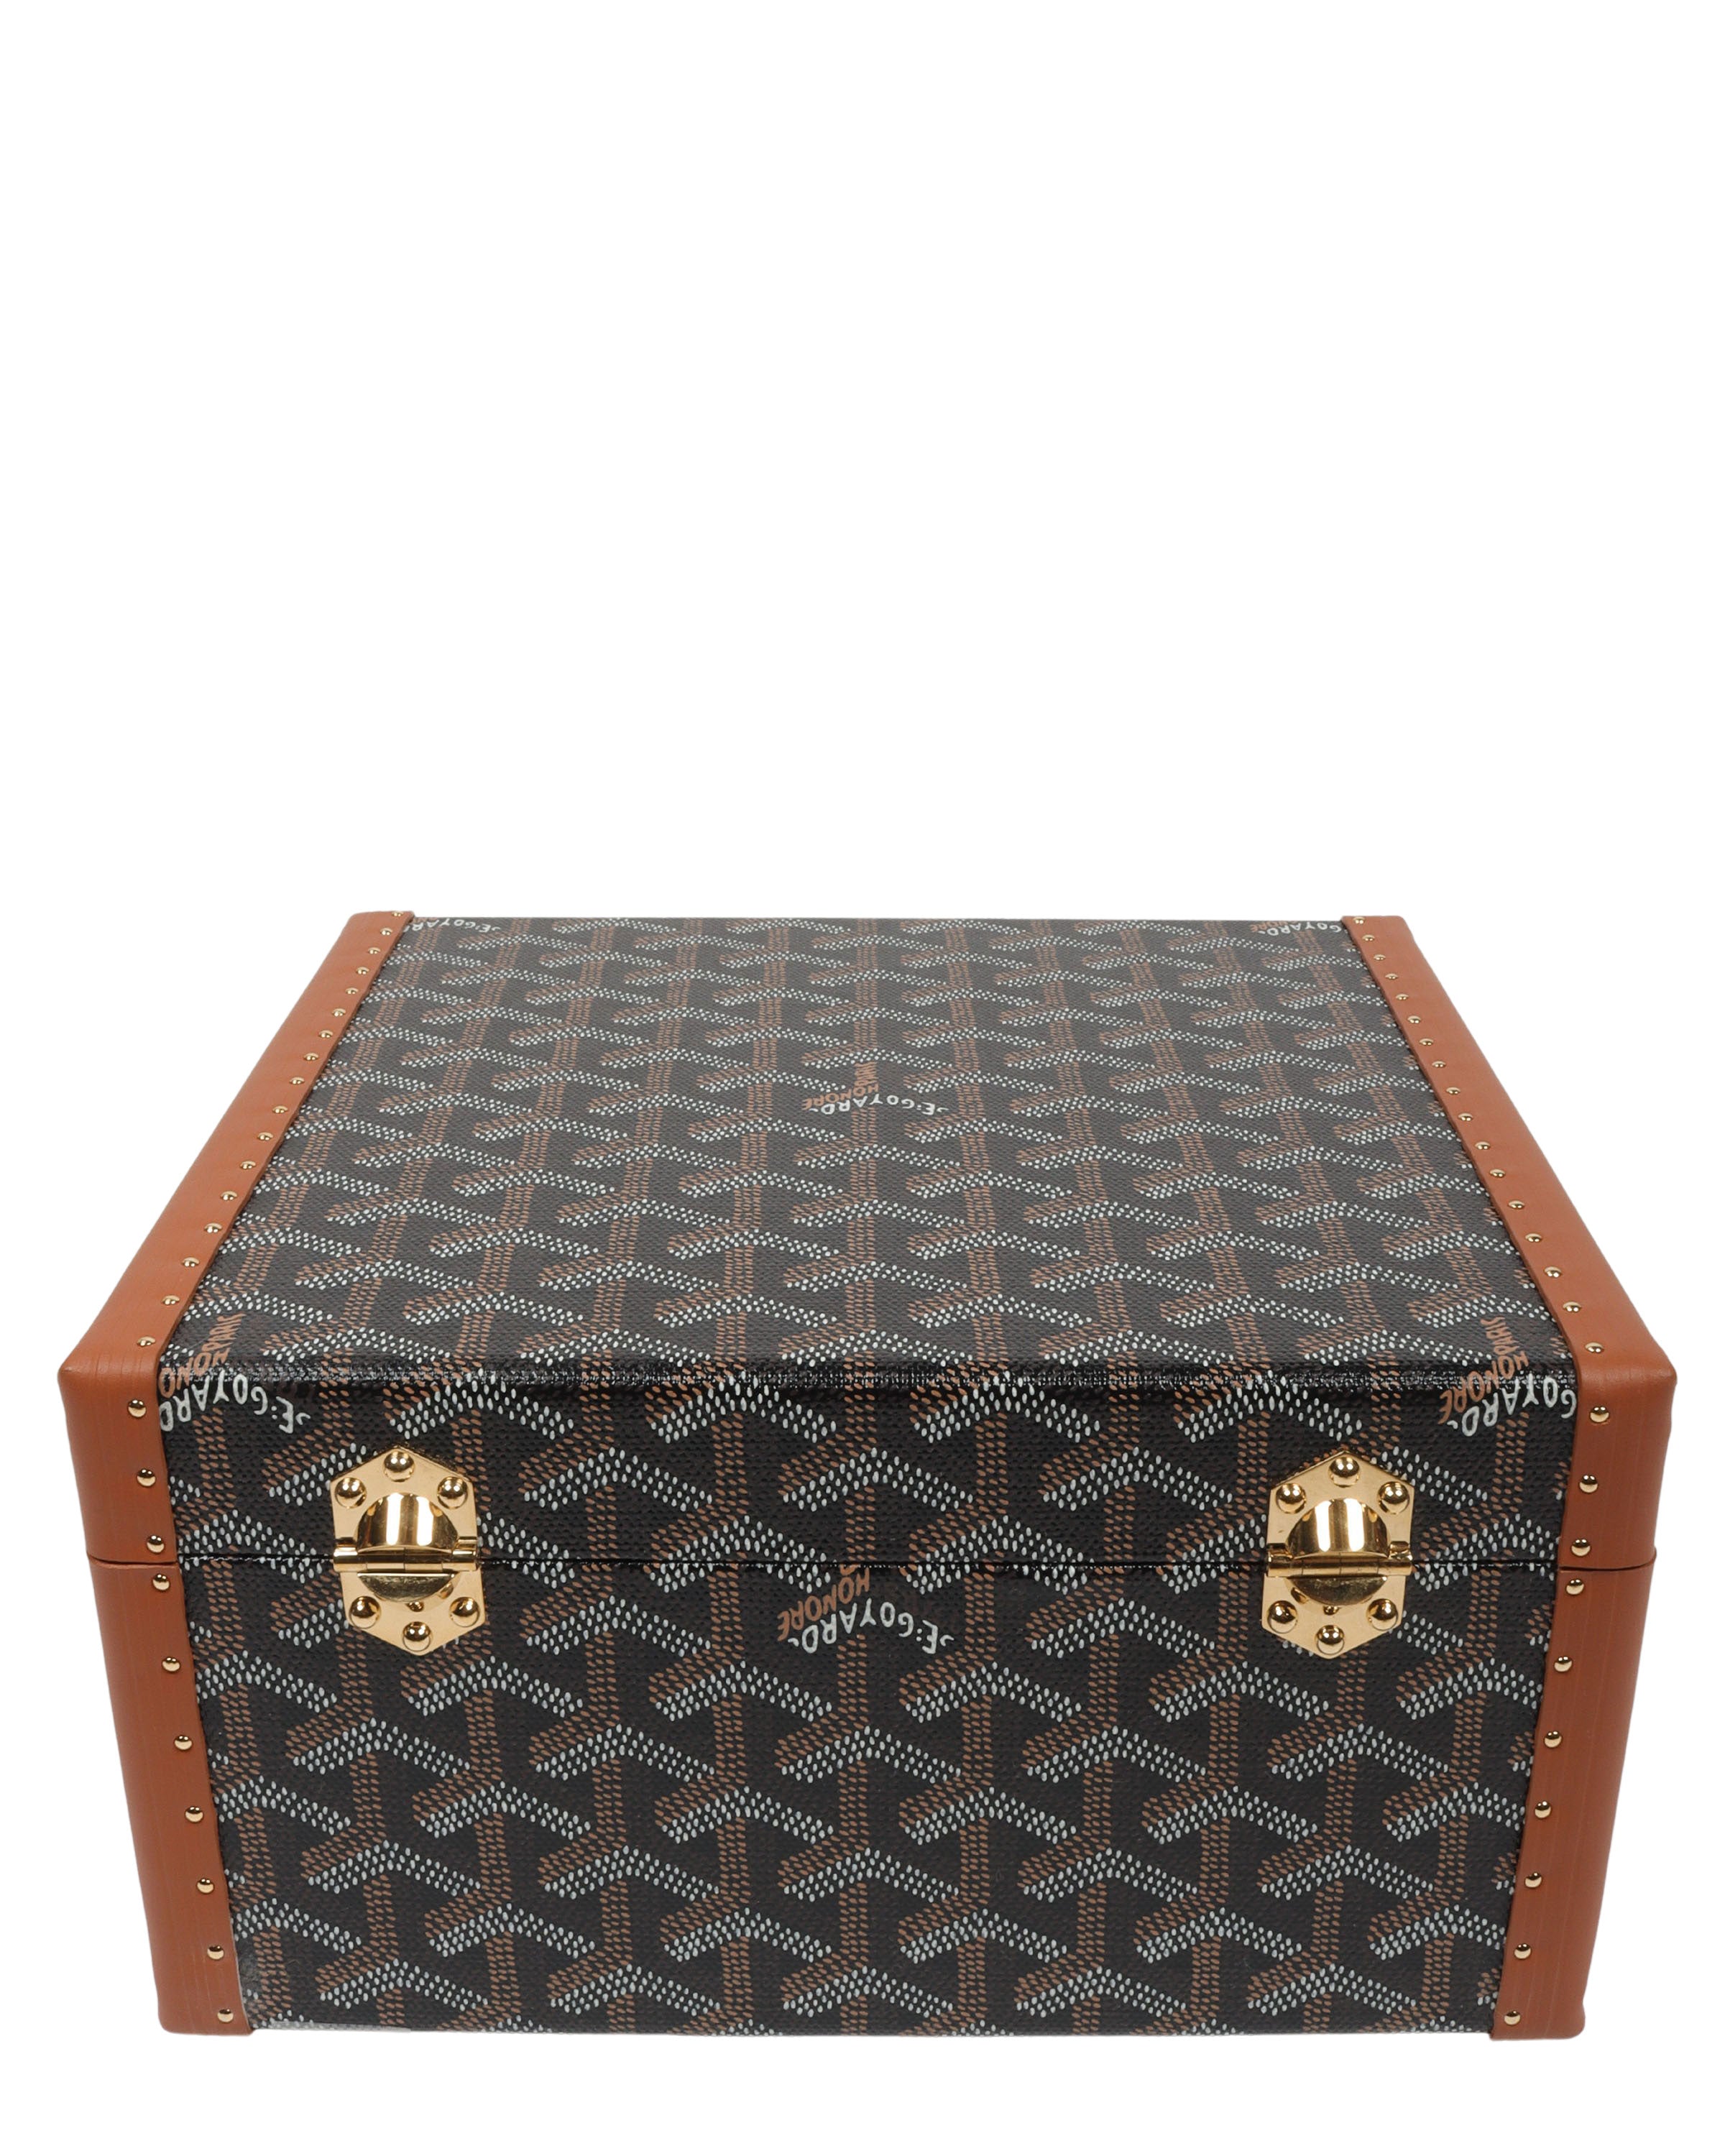 Goyard] The new Limousine : r/Watches